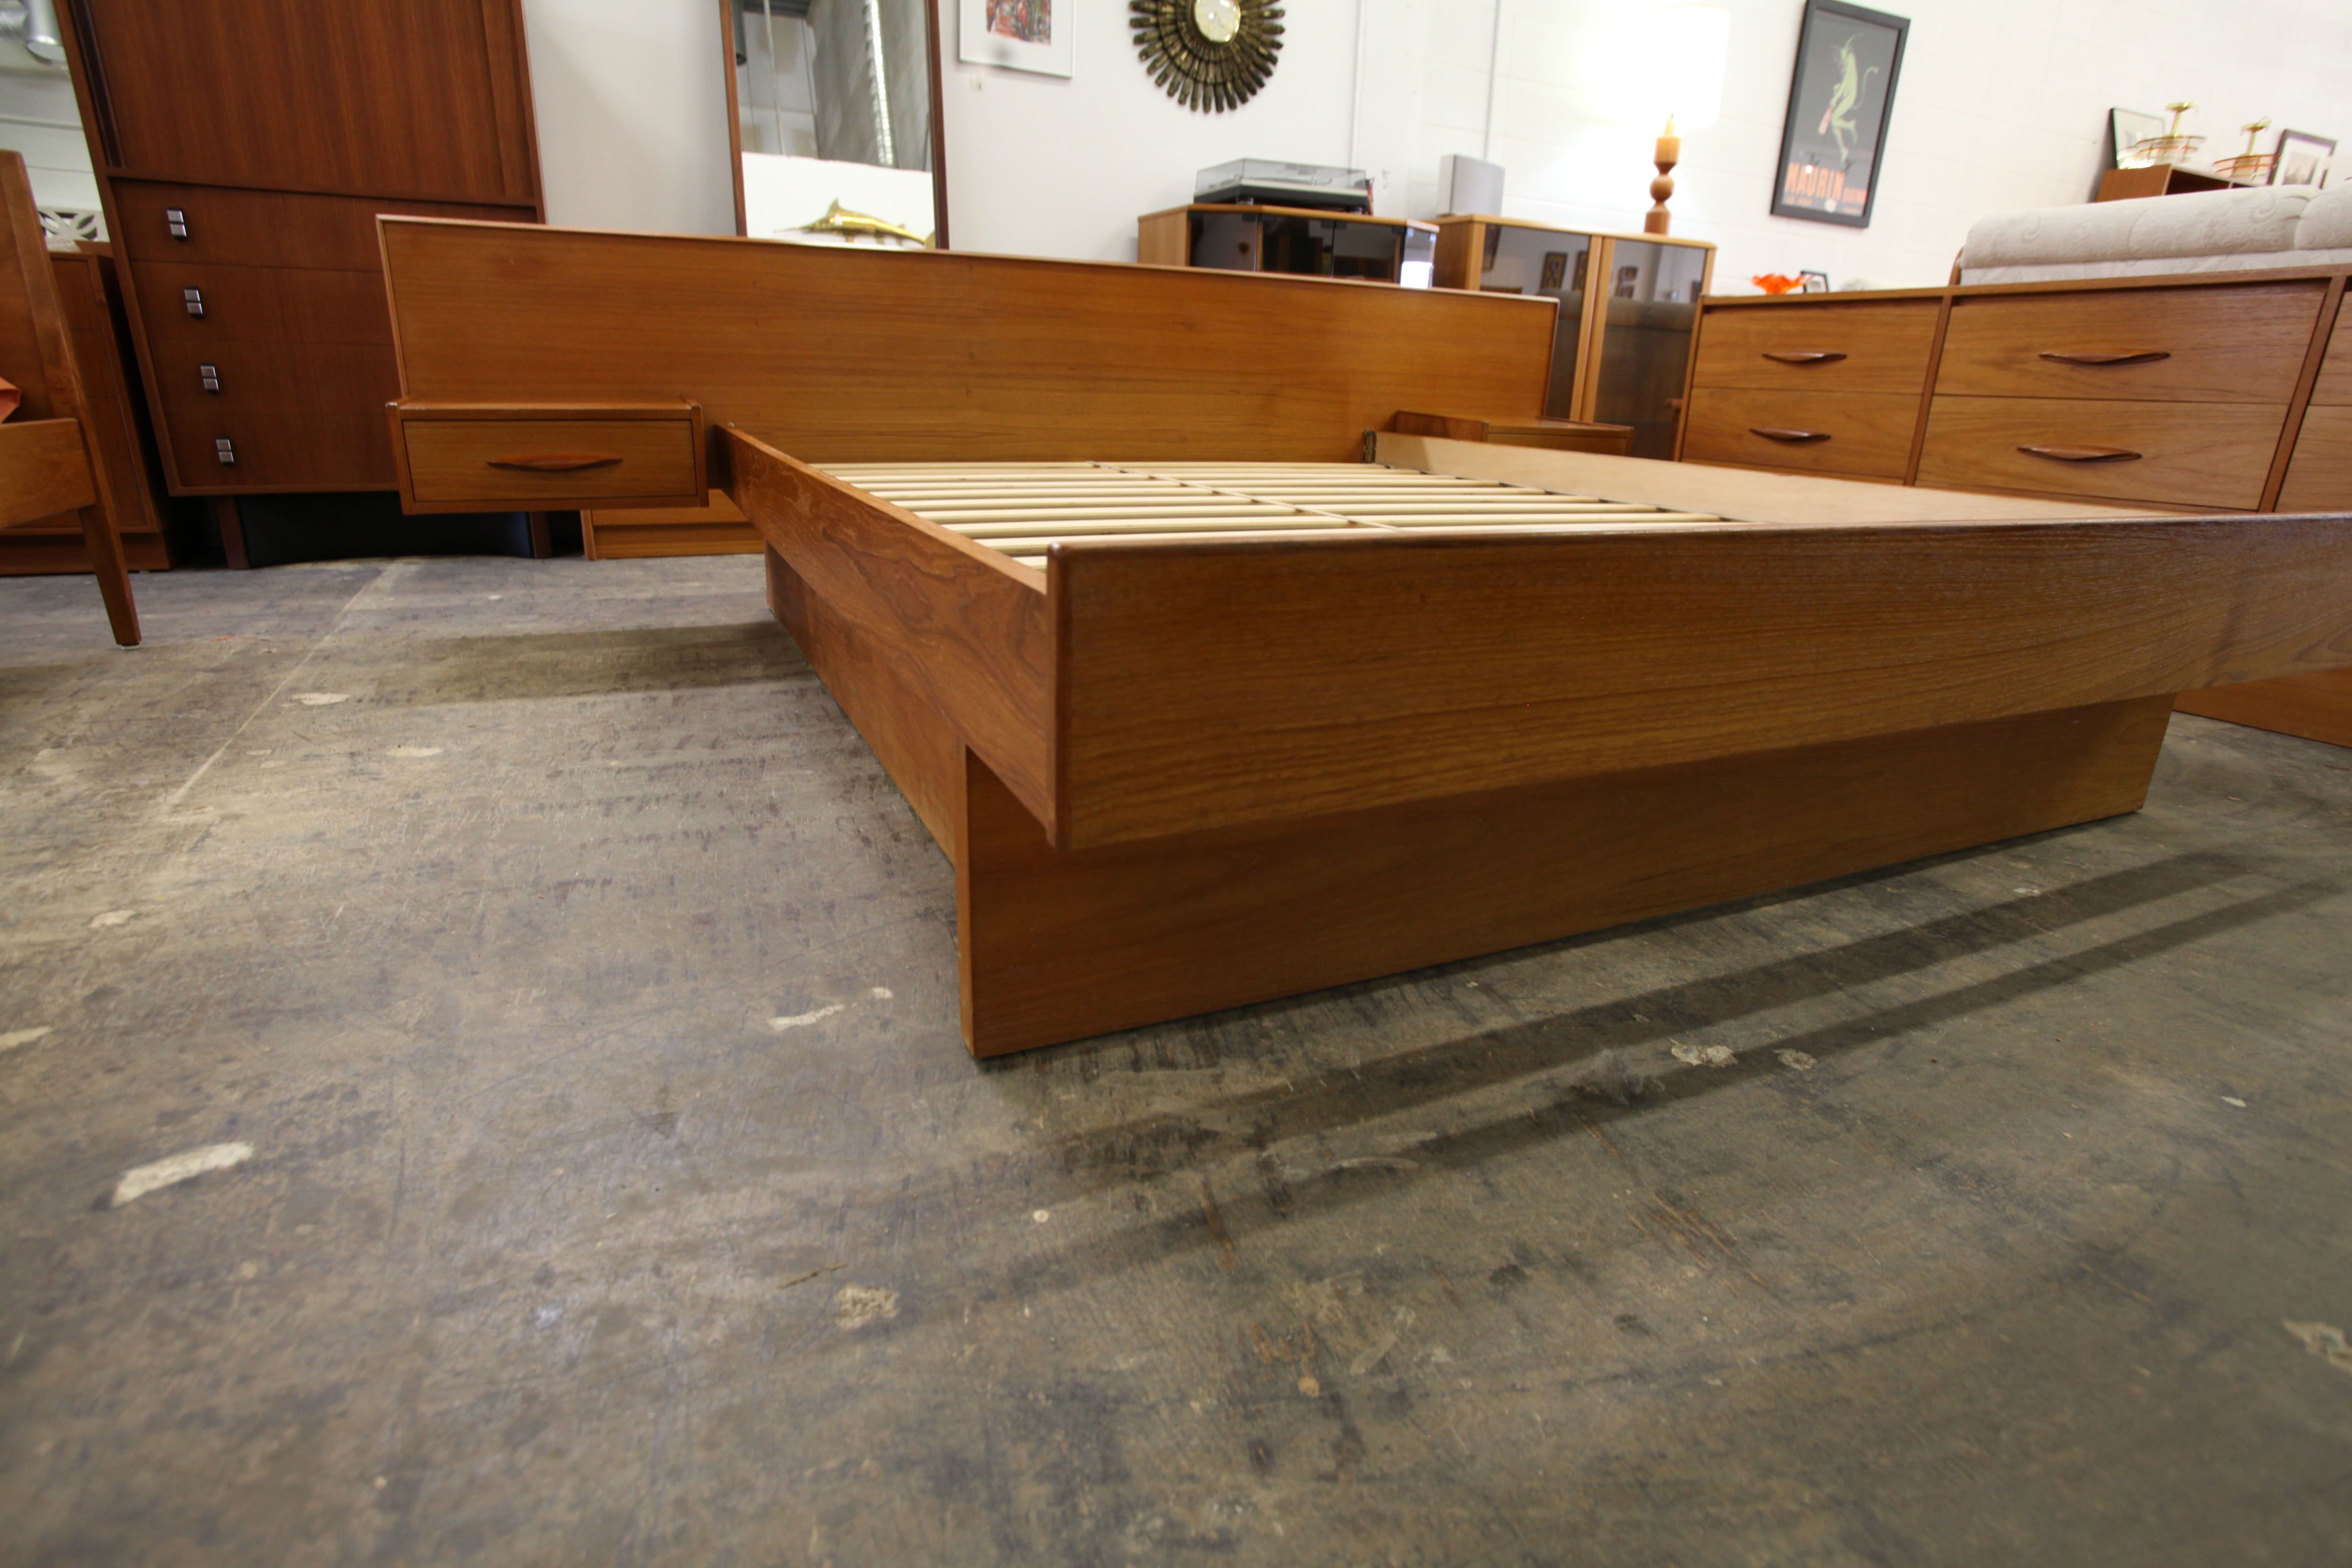 Vintage Teak Queen Size bed w/ Floating Night Stands (105"W x 82.5"D x 29"H)